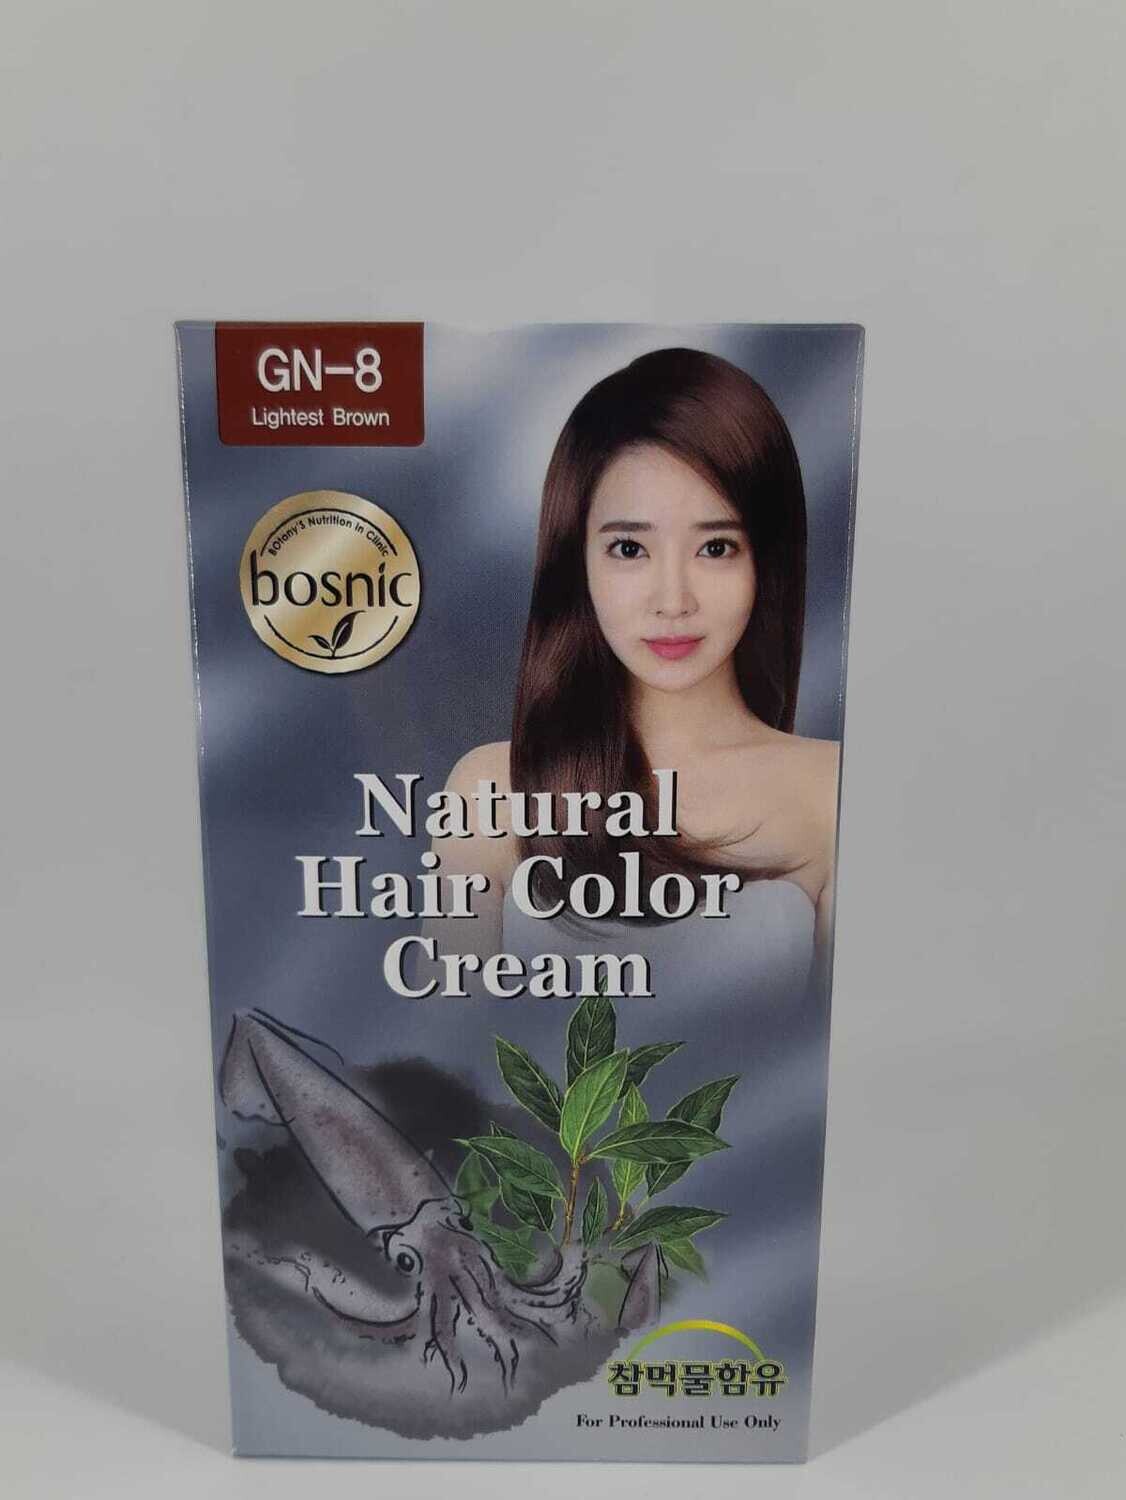 Bosnic GN-8 Lightest Brown Natural Hair Color Cream